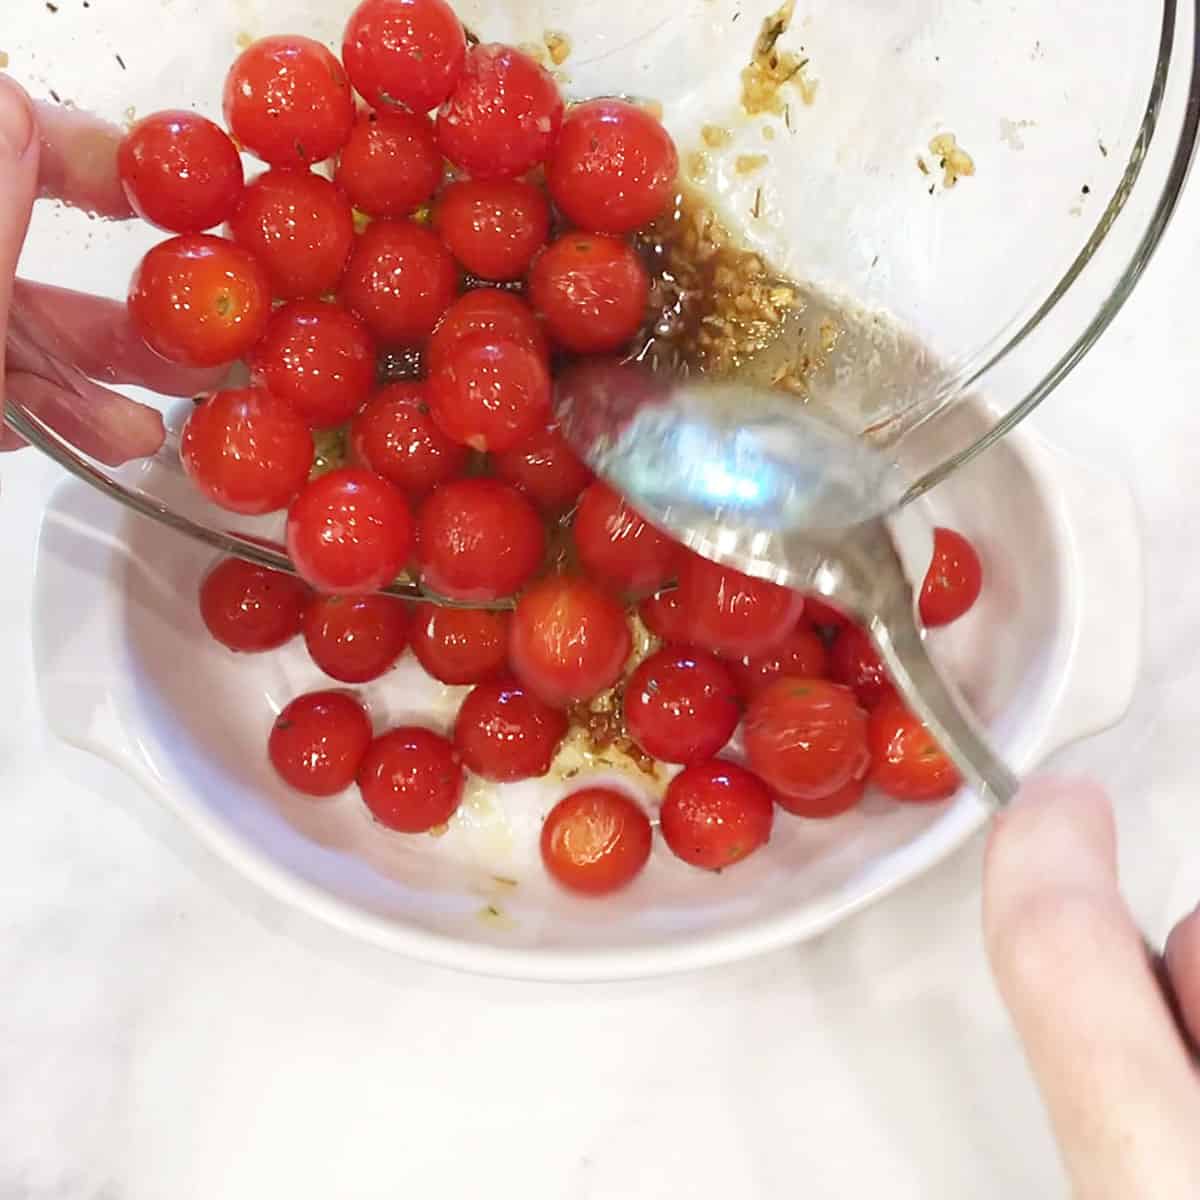 Transferring the tomatoes to a baking dish.